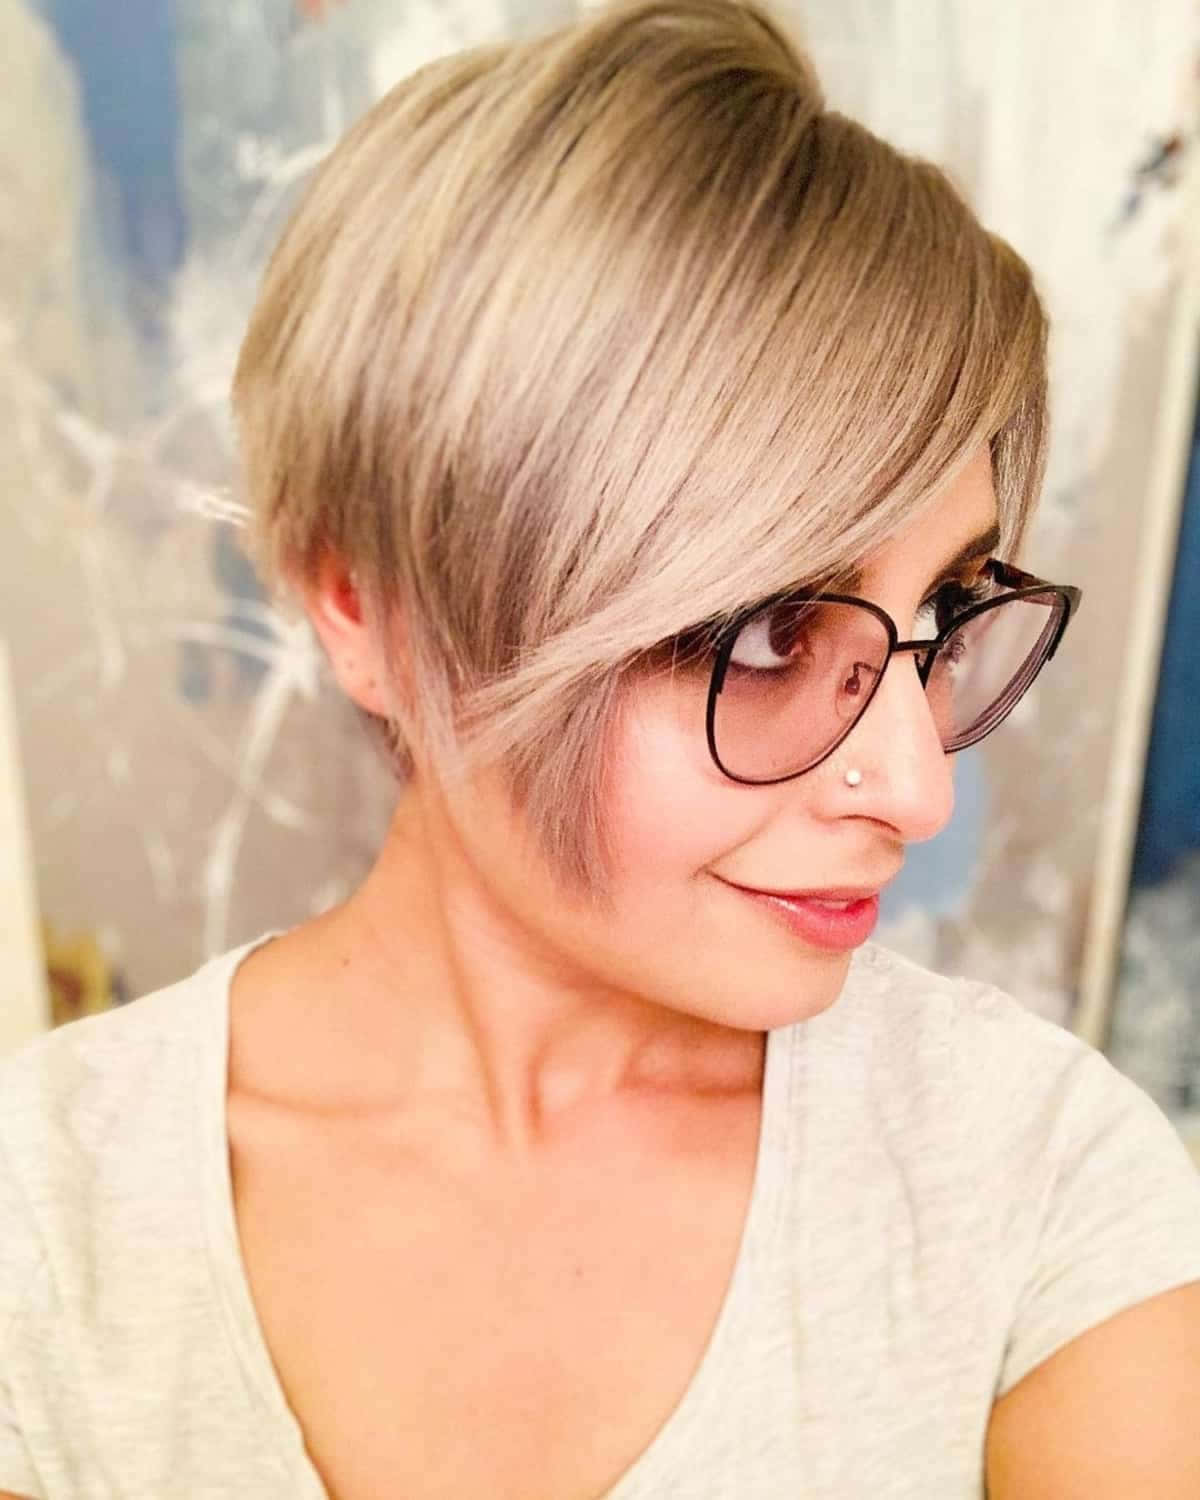 A Woman With Glasses And A Short Pixie Cut